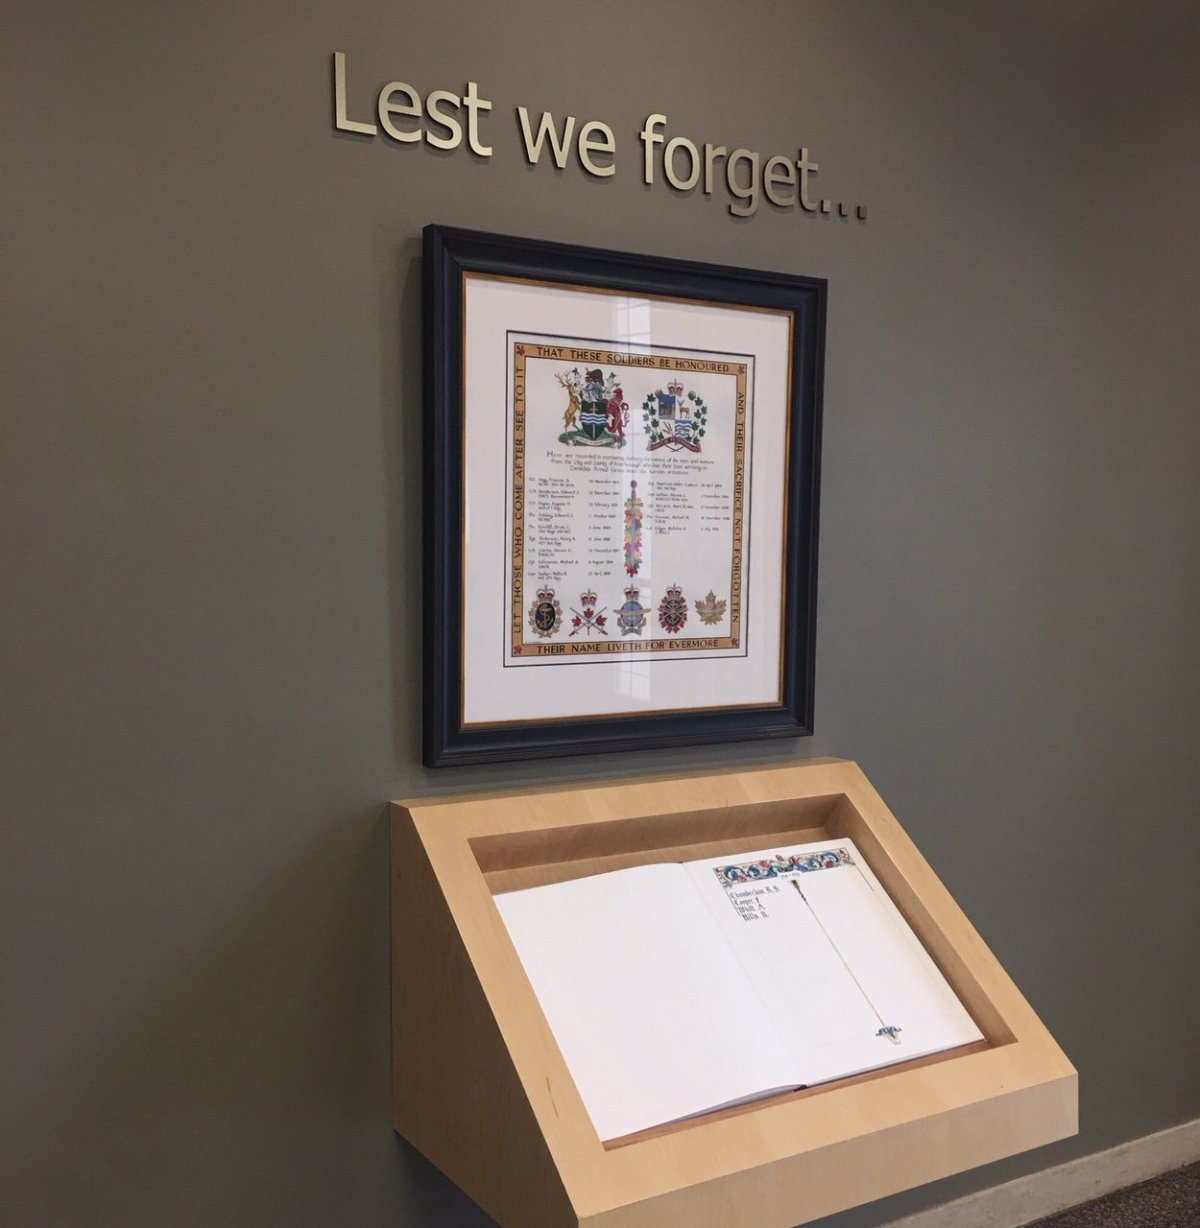 The Book of Remembrance and Scroll of Remembrance are now on display at Peterborough City Hall.